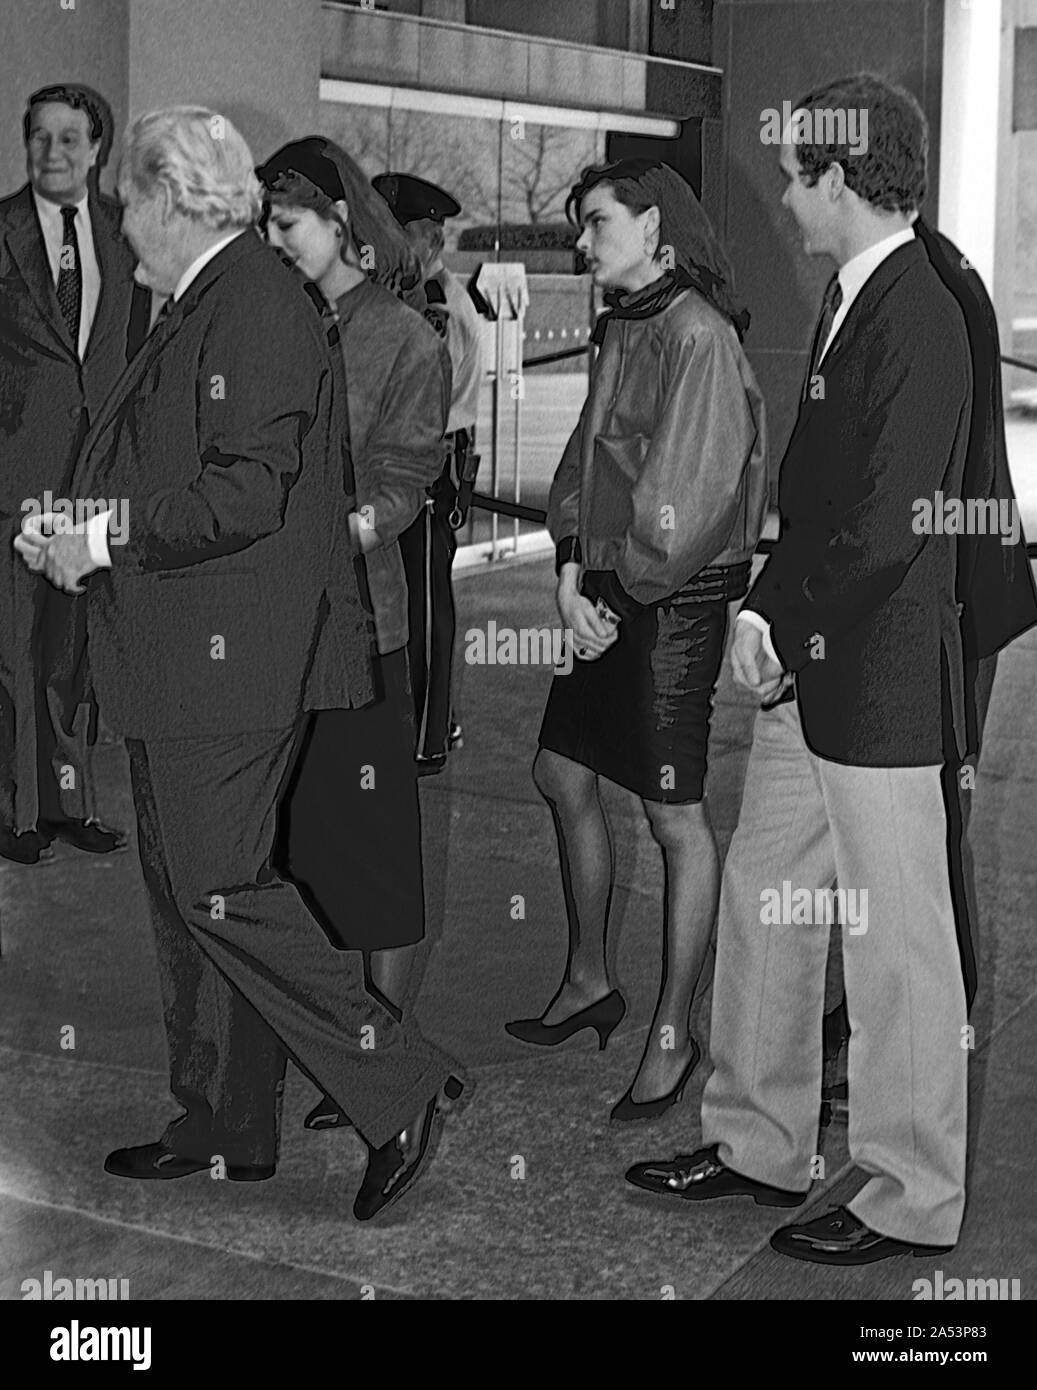 Washington DC, USA, February 19, 1984 Princess Grace Foundation luncheon at the United States State Department, Prince Rainier III (left) Princess Caroline, (center) Princess Stephanie (2nd from right) and Prince Albert (right) arrive at the reception Stock Photo